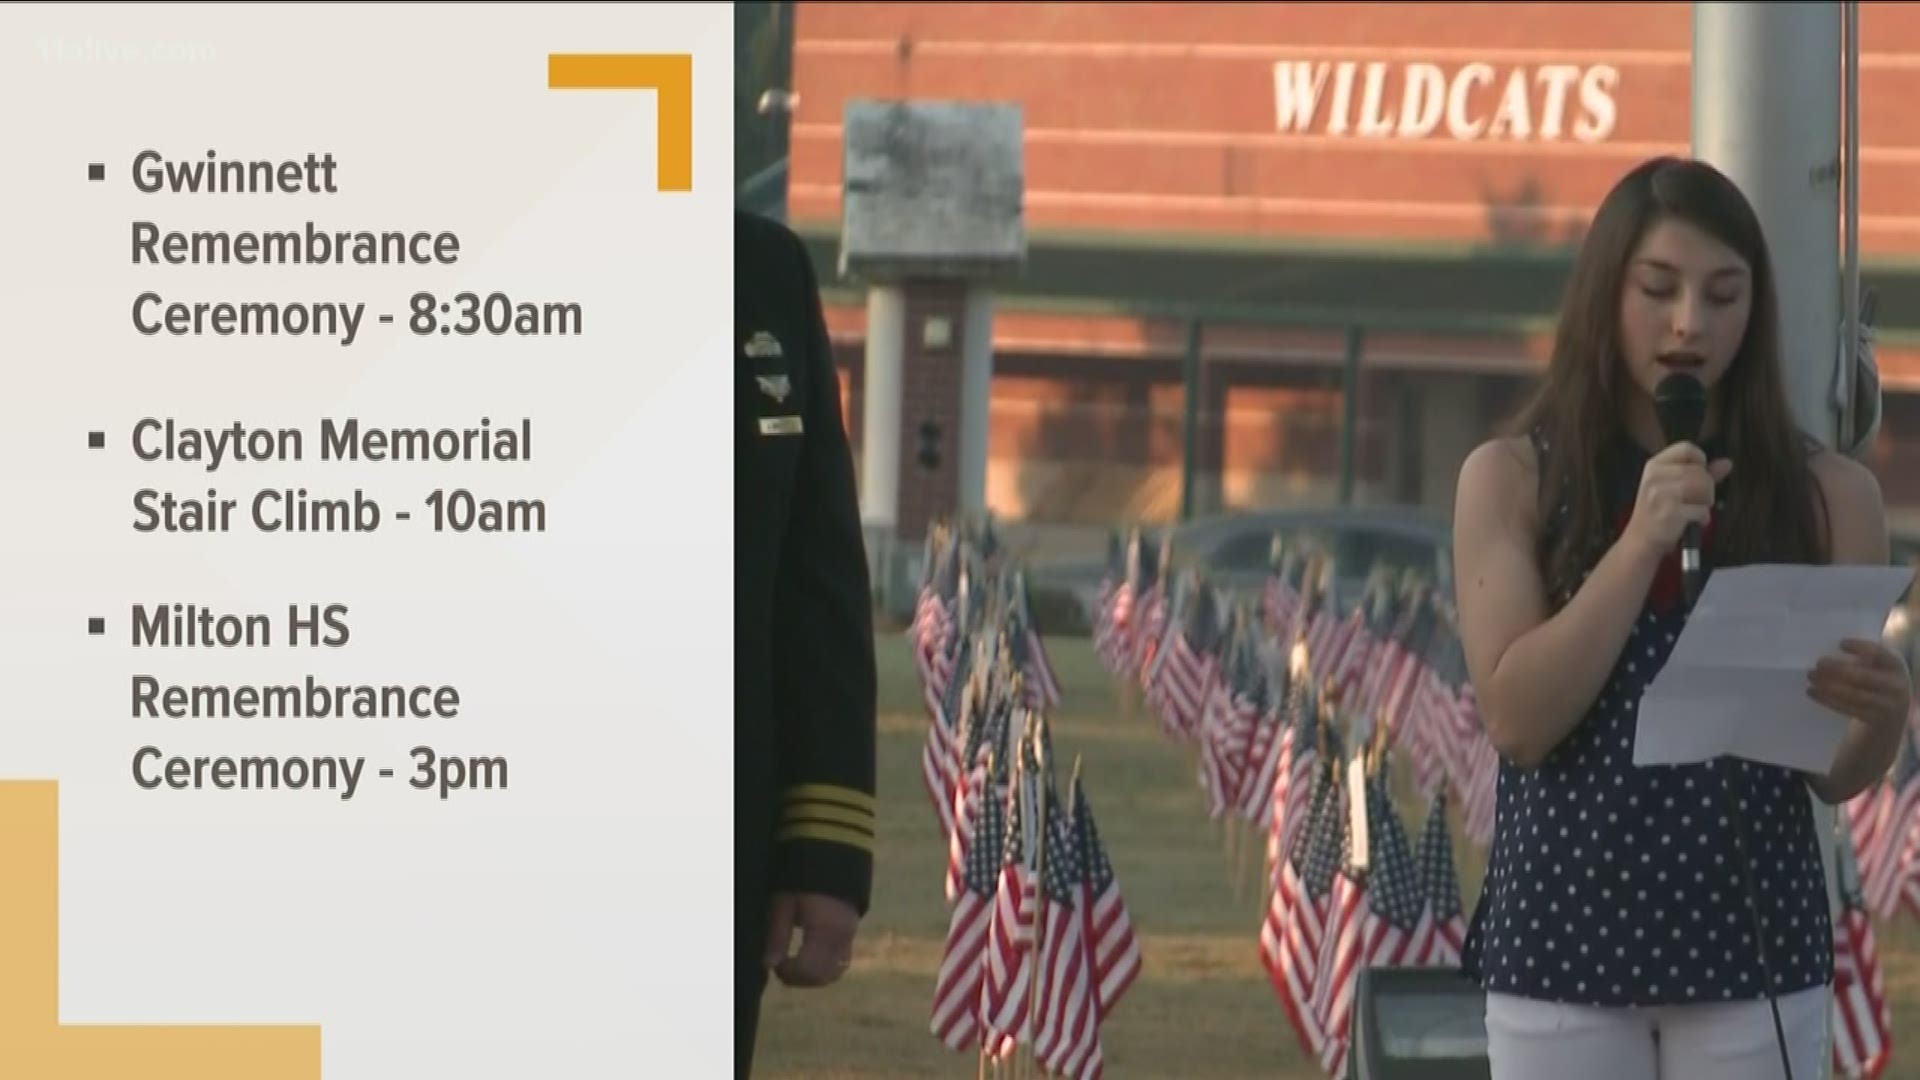 There will be national tributes as well as local remembrances.